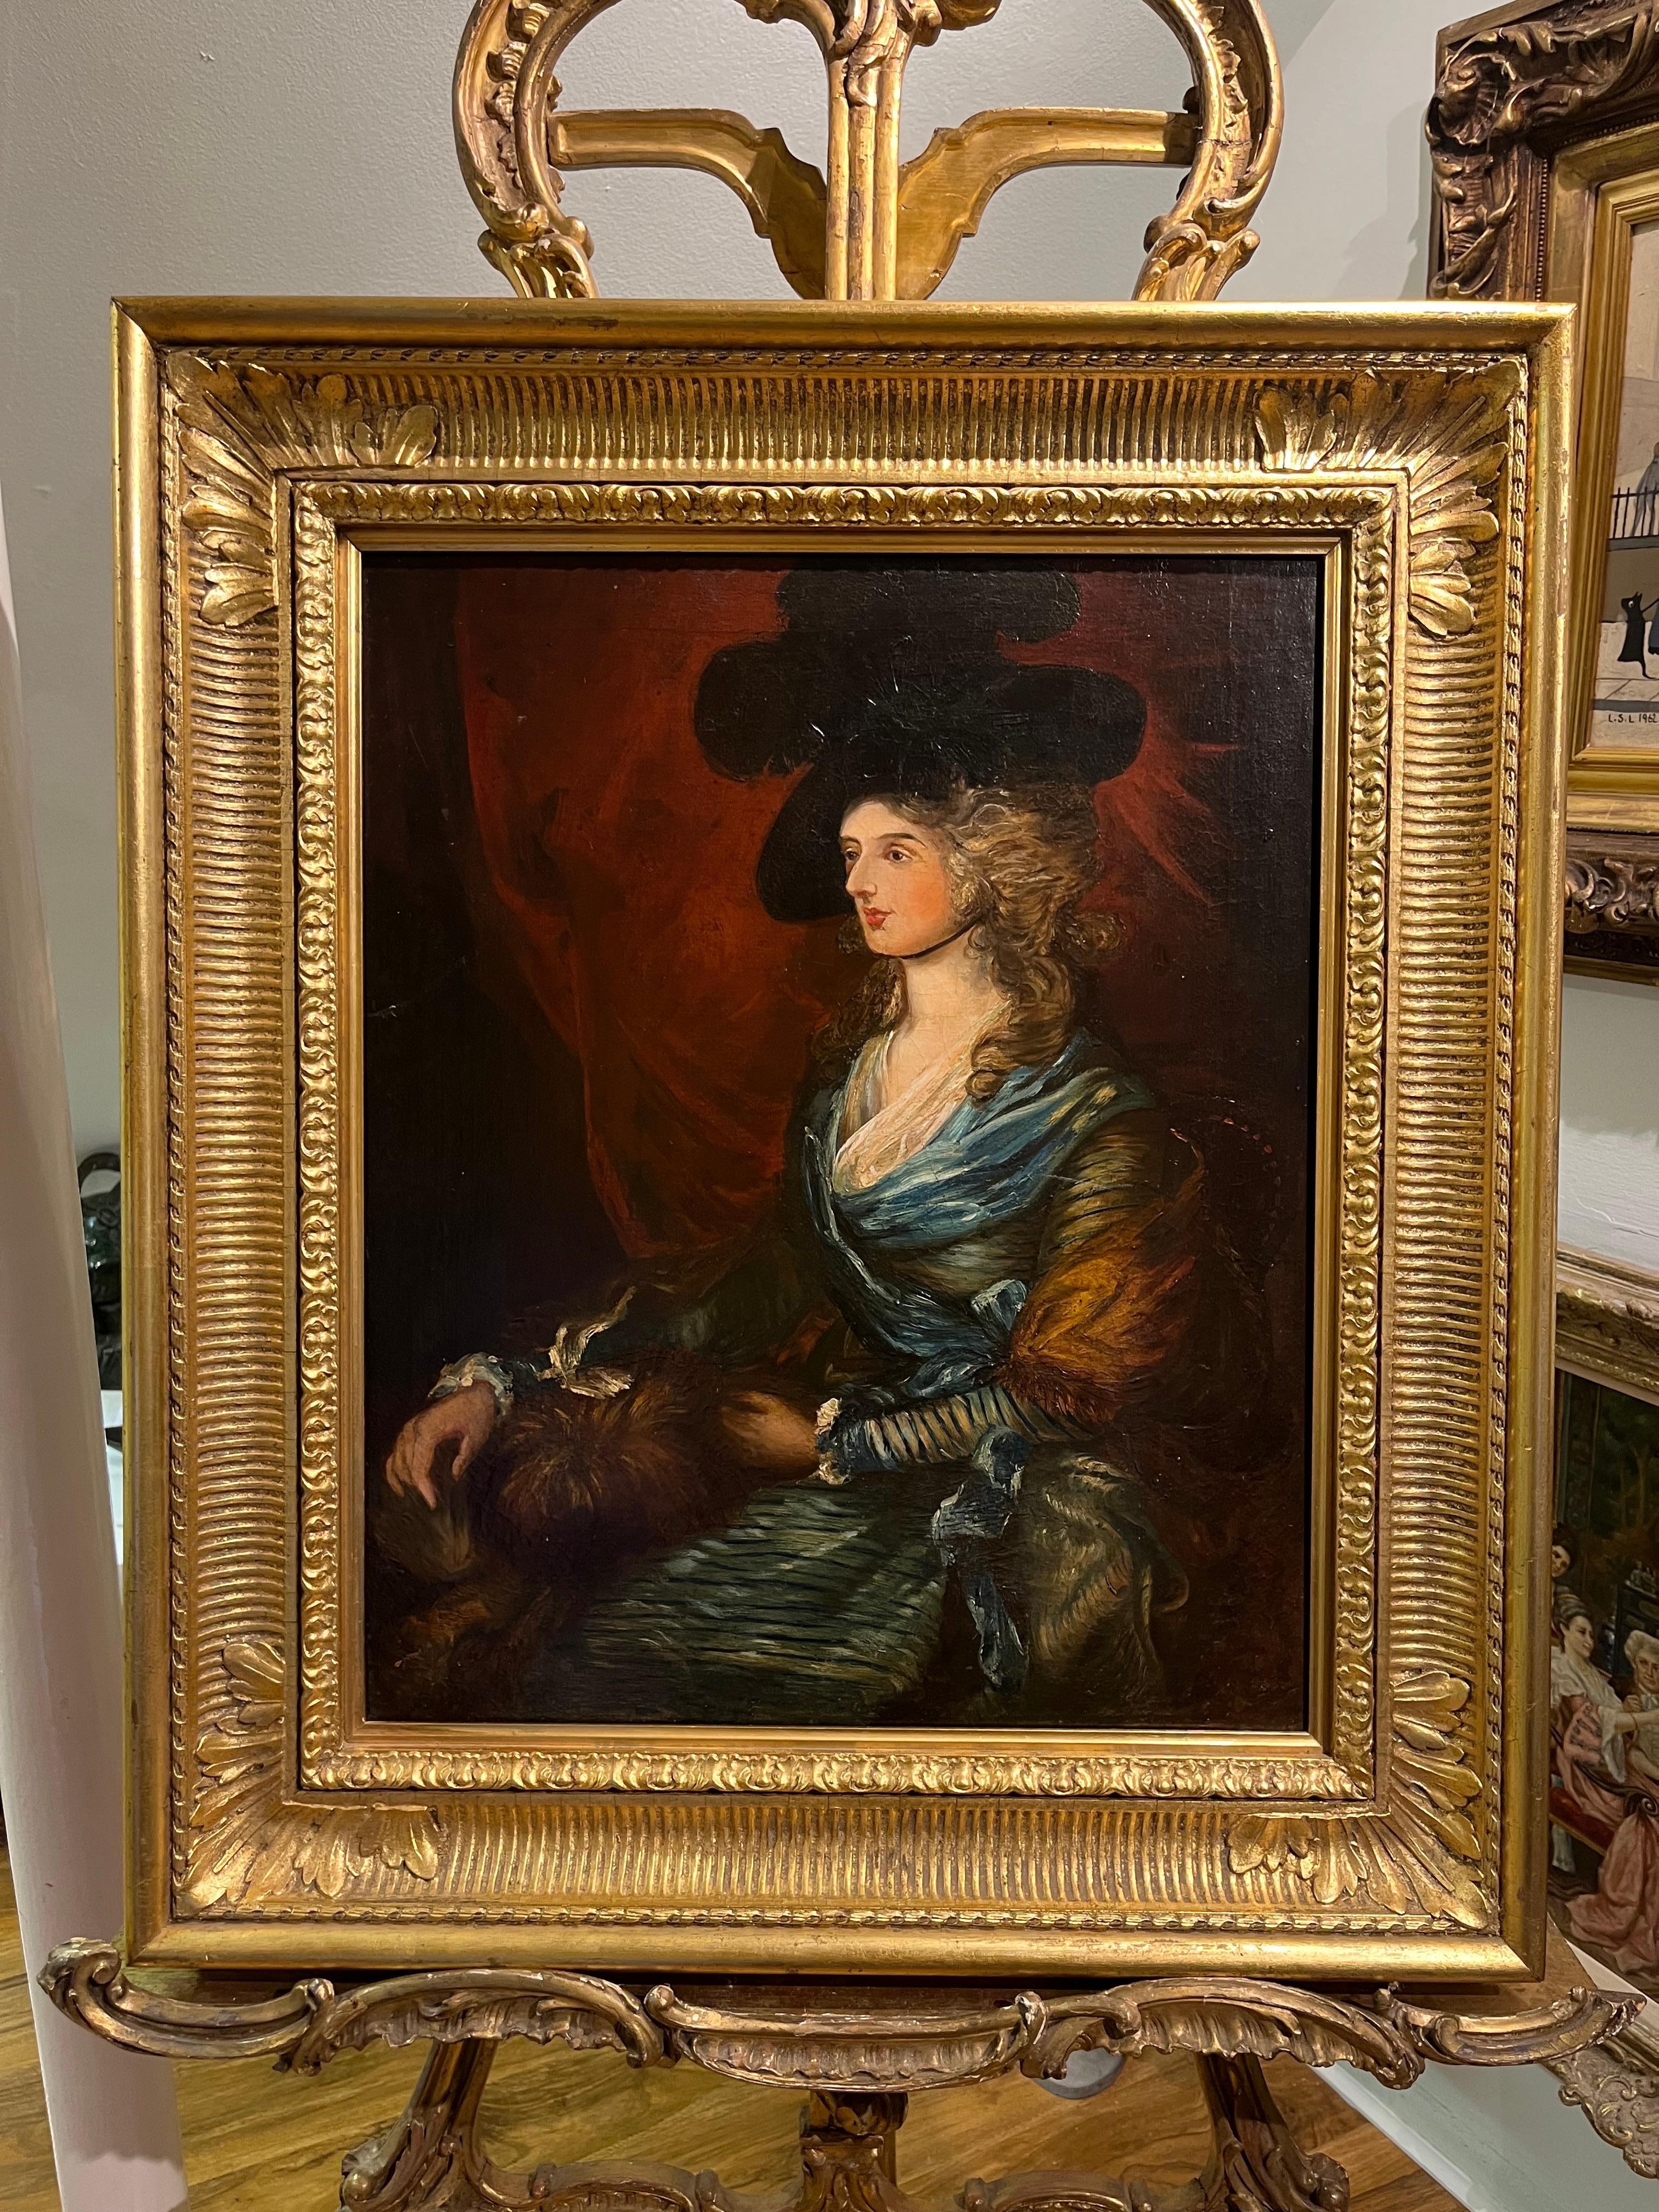 OLD MASTER LATE 18th /EARLY 19th CENTURY CIRCLE of THOMAS GAINSBOROUGH OIL PAINTING

Fine OIL PAINTING Old Master 18th Century R.A artist in a Large 
Gold Gilt Frame

By ? Similar $10,000 Premier Collection

Description

““Museum piece quality